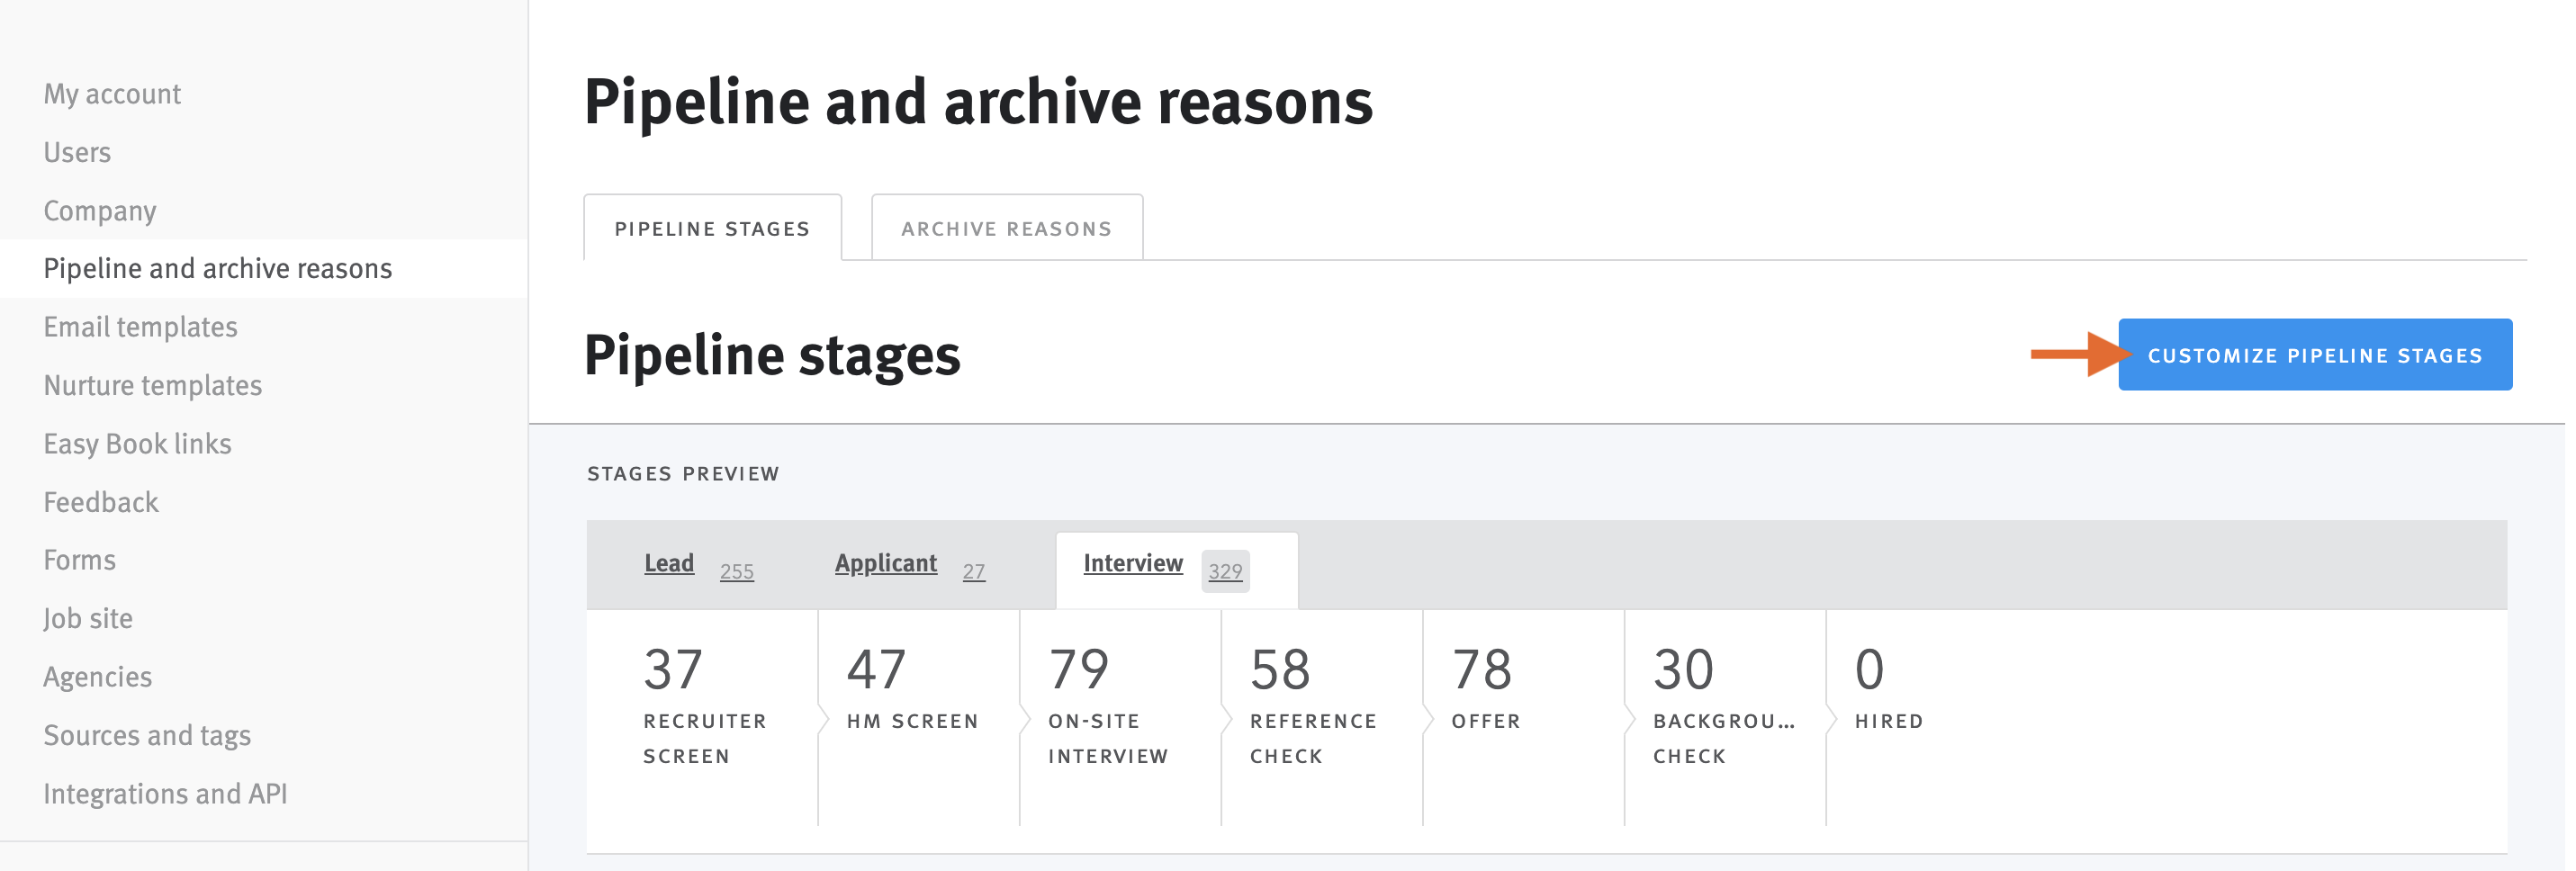 Pipeline and archive reasons page in Settings, with arrow pointing to Customize Pipeline Stages button.